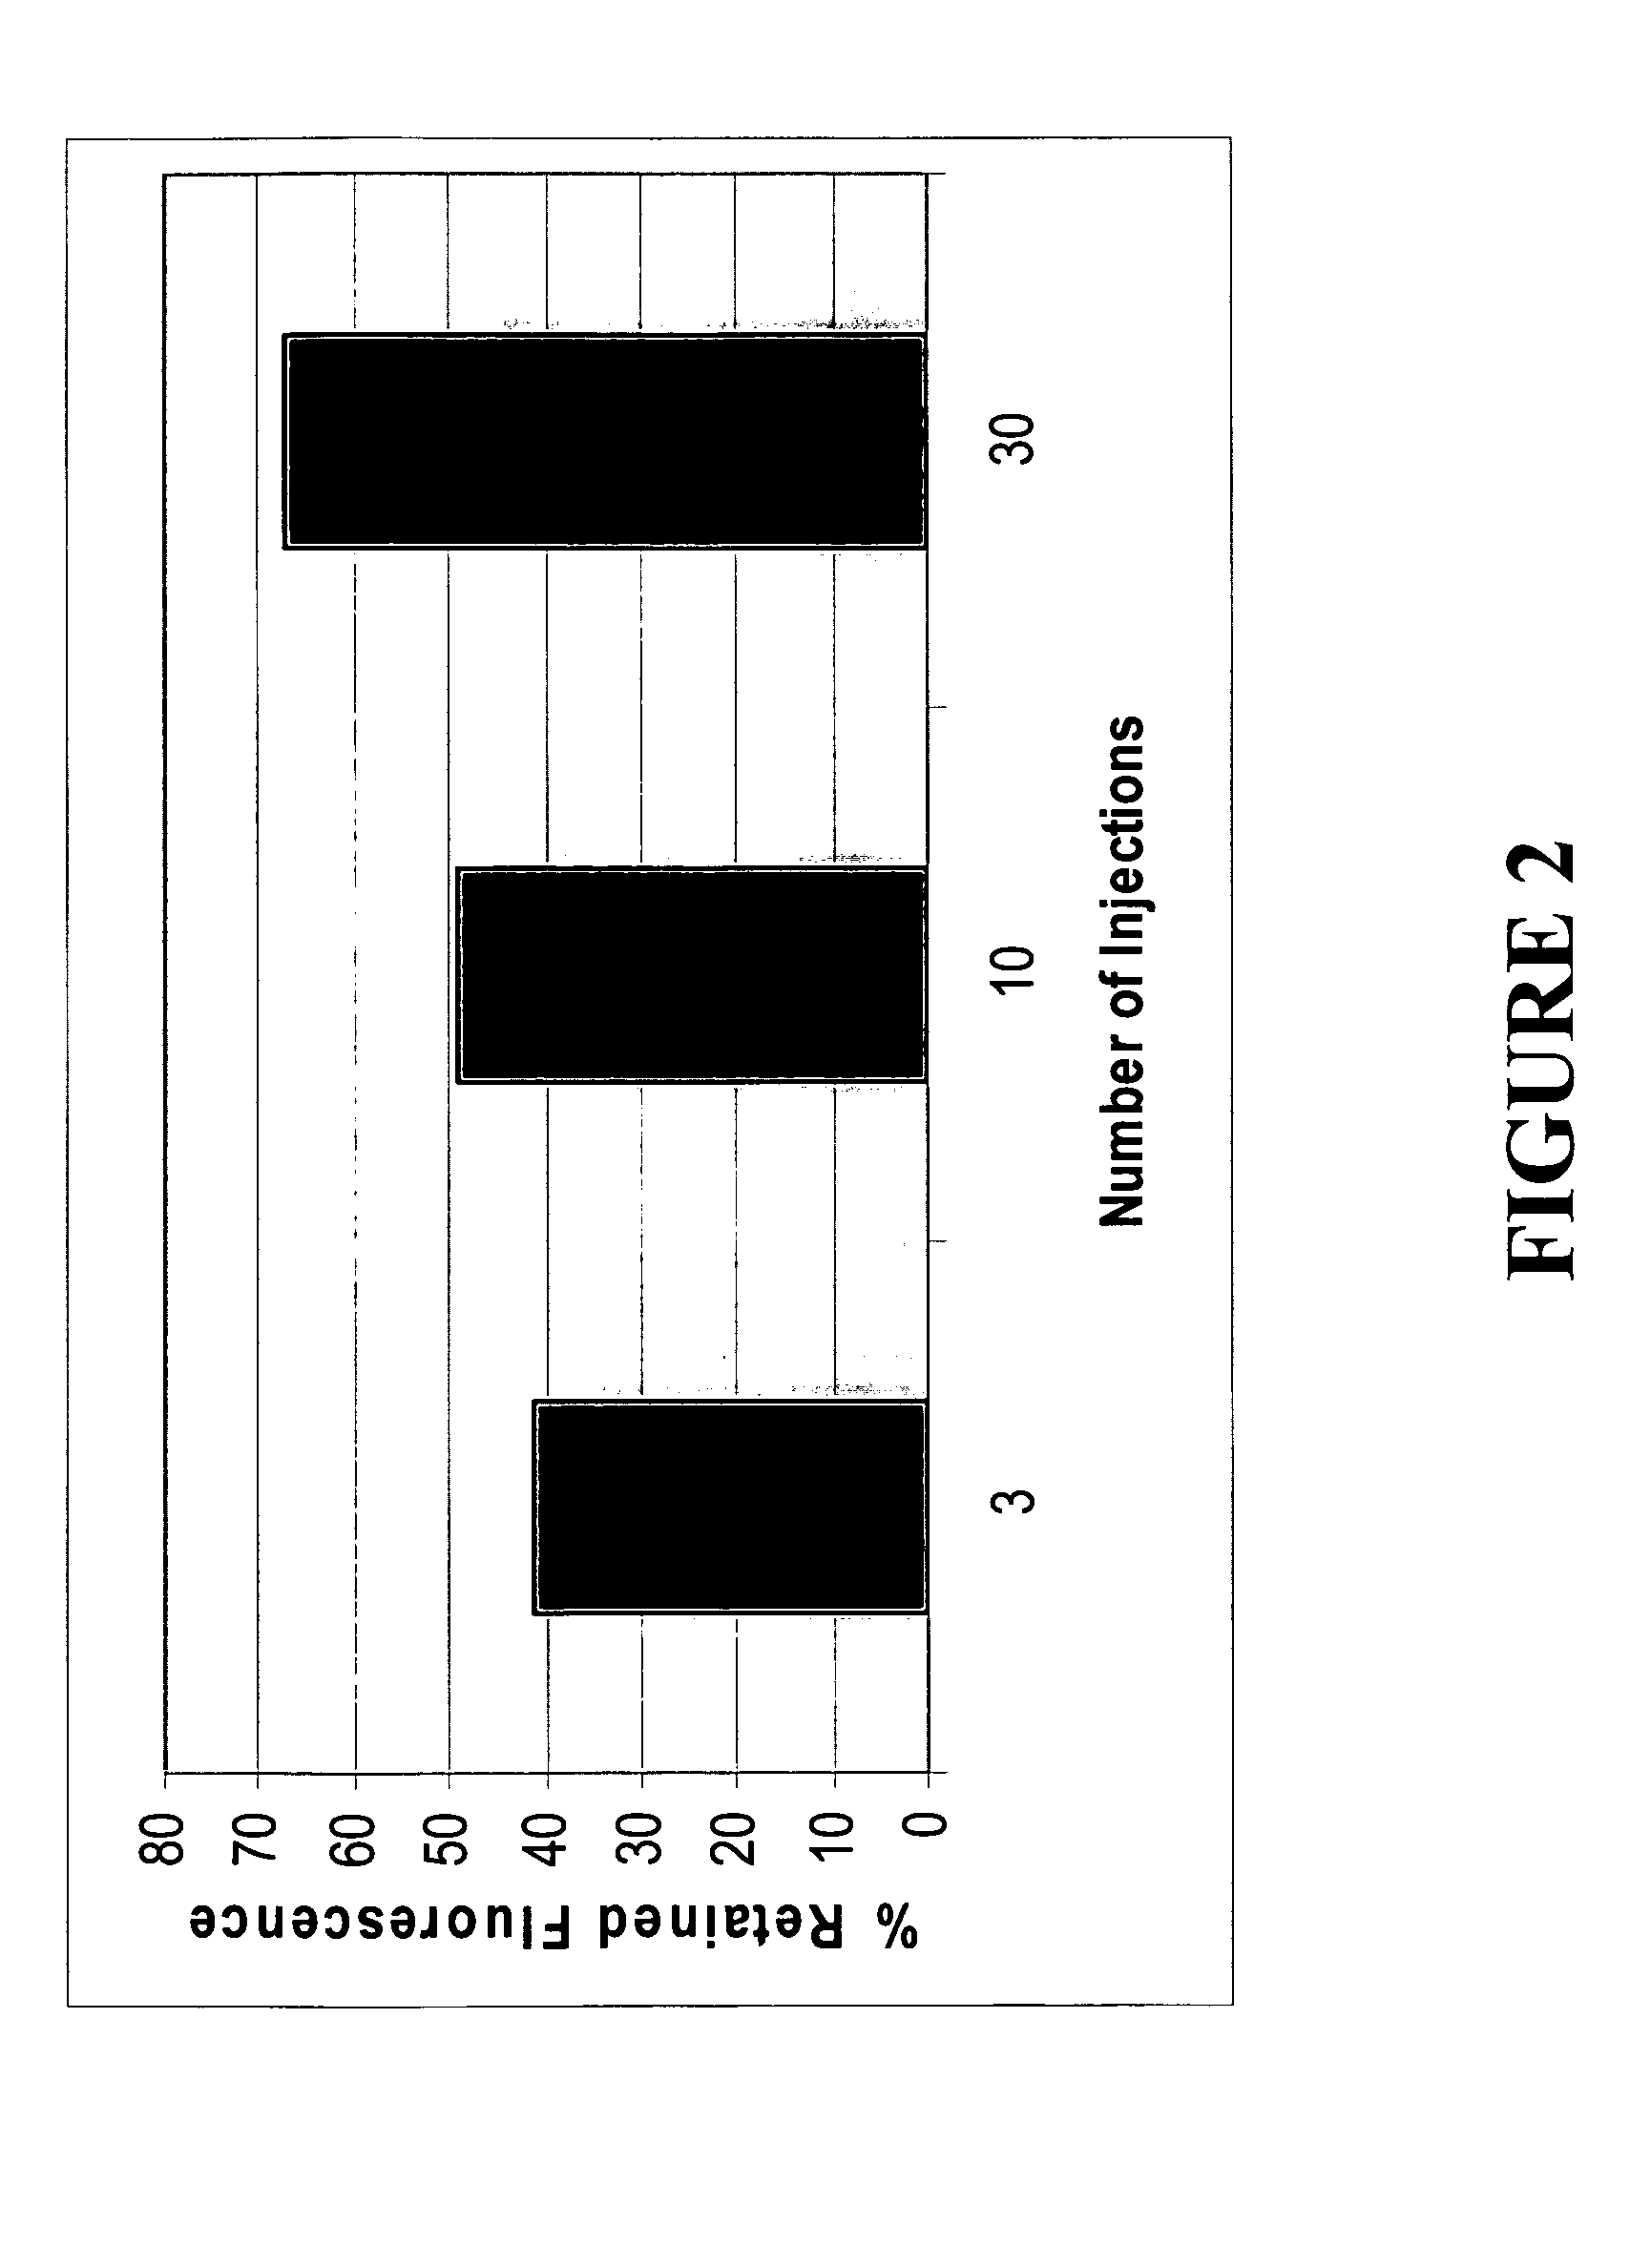 Method for the delivery of sustained release agents